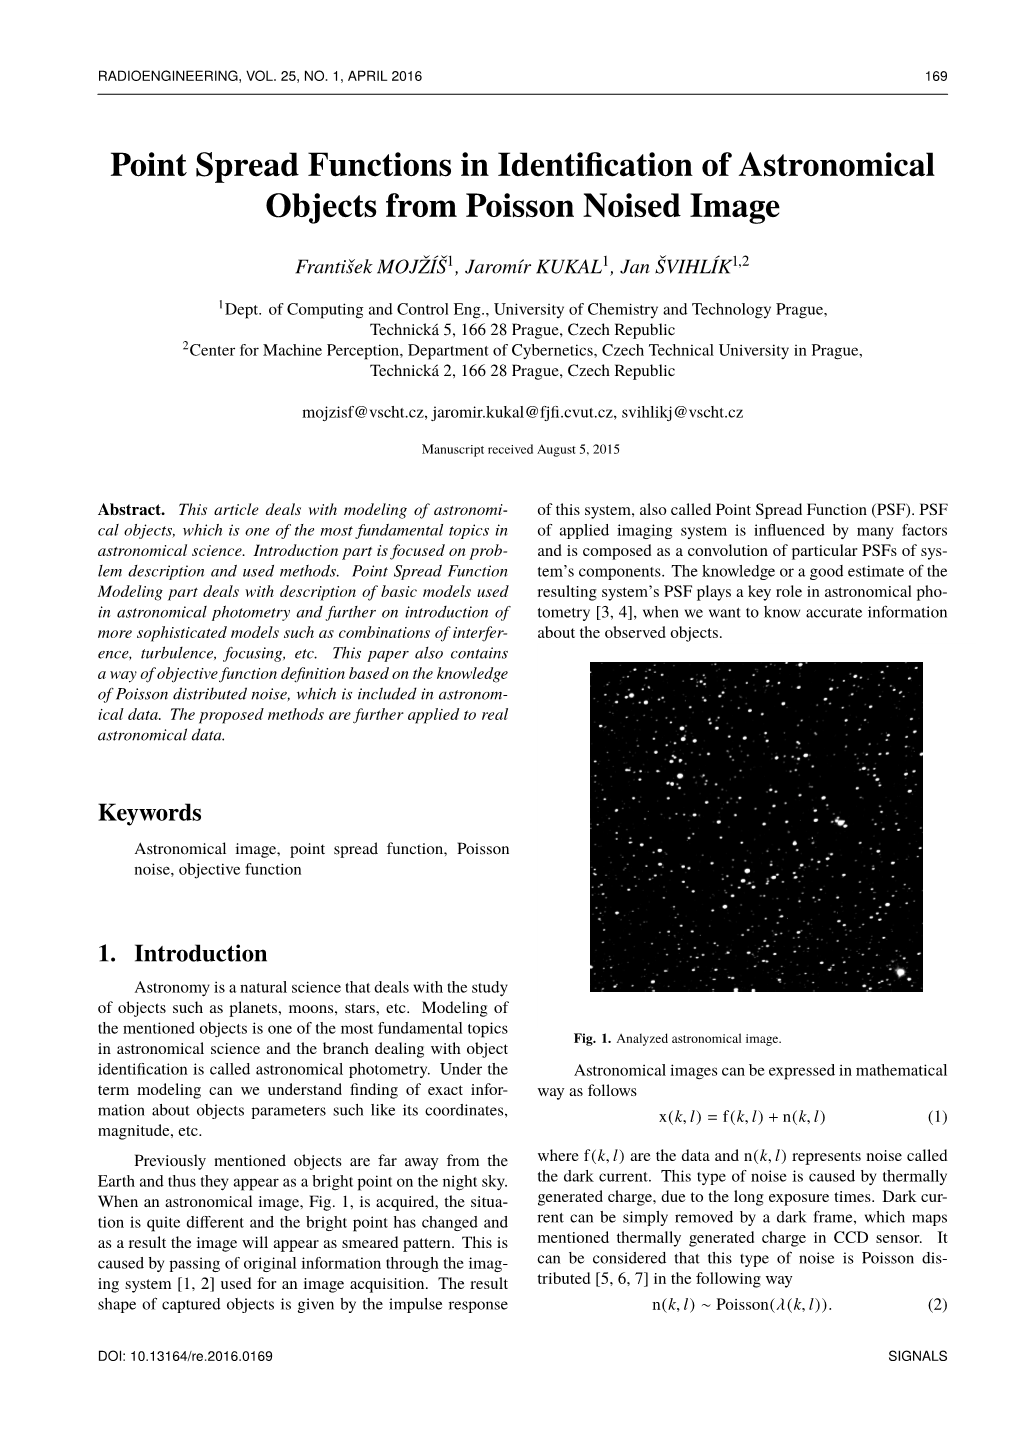 Point Spread Functions in Identification of Astronomical Objects